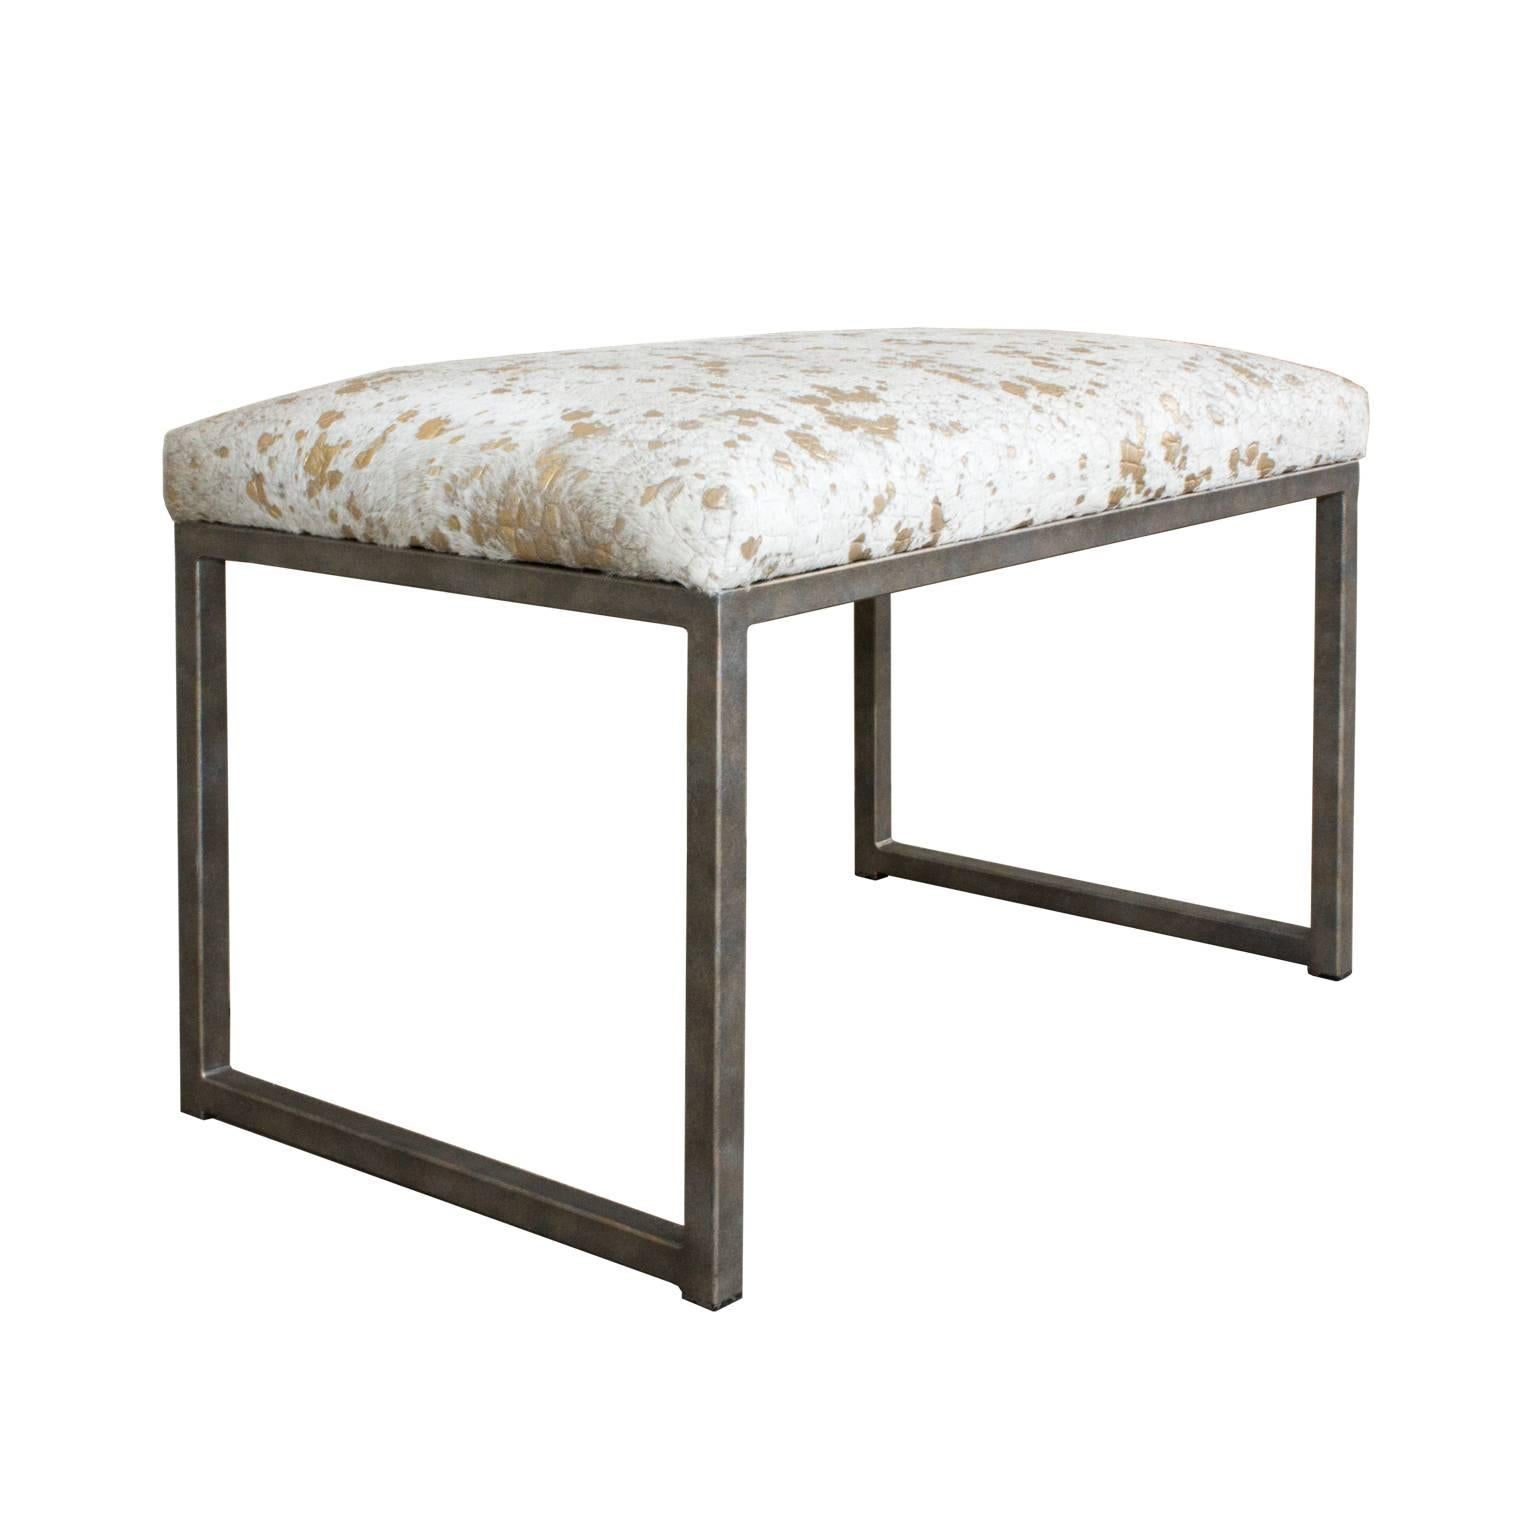 These Brazilian benches feature a gold metallic splash embossed cowhide are crafted with a custom iron base with slight gold finish. A custom-made piece, of which we have only two available. The cowhide used is a natural Brazilian cowhide, which has